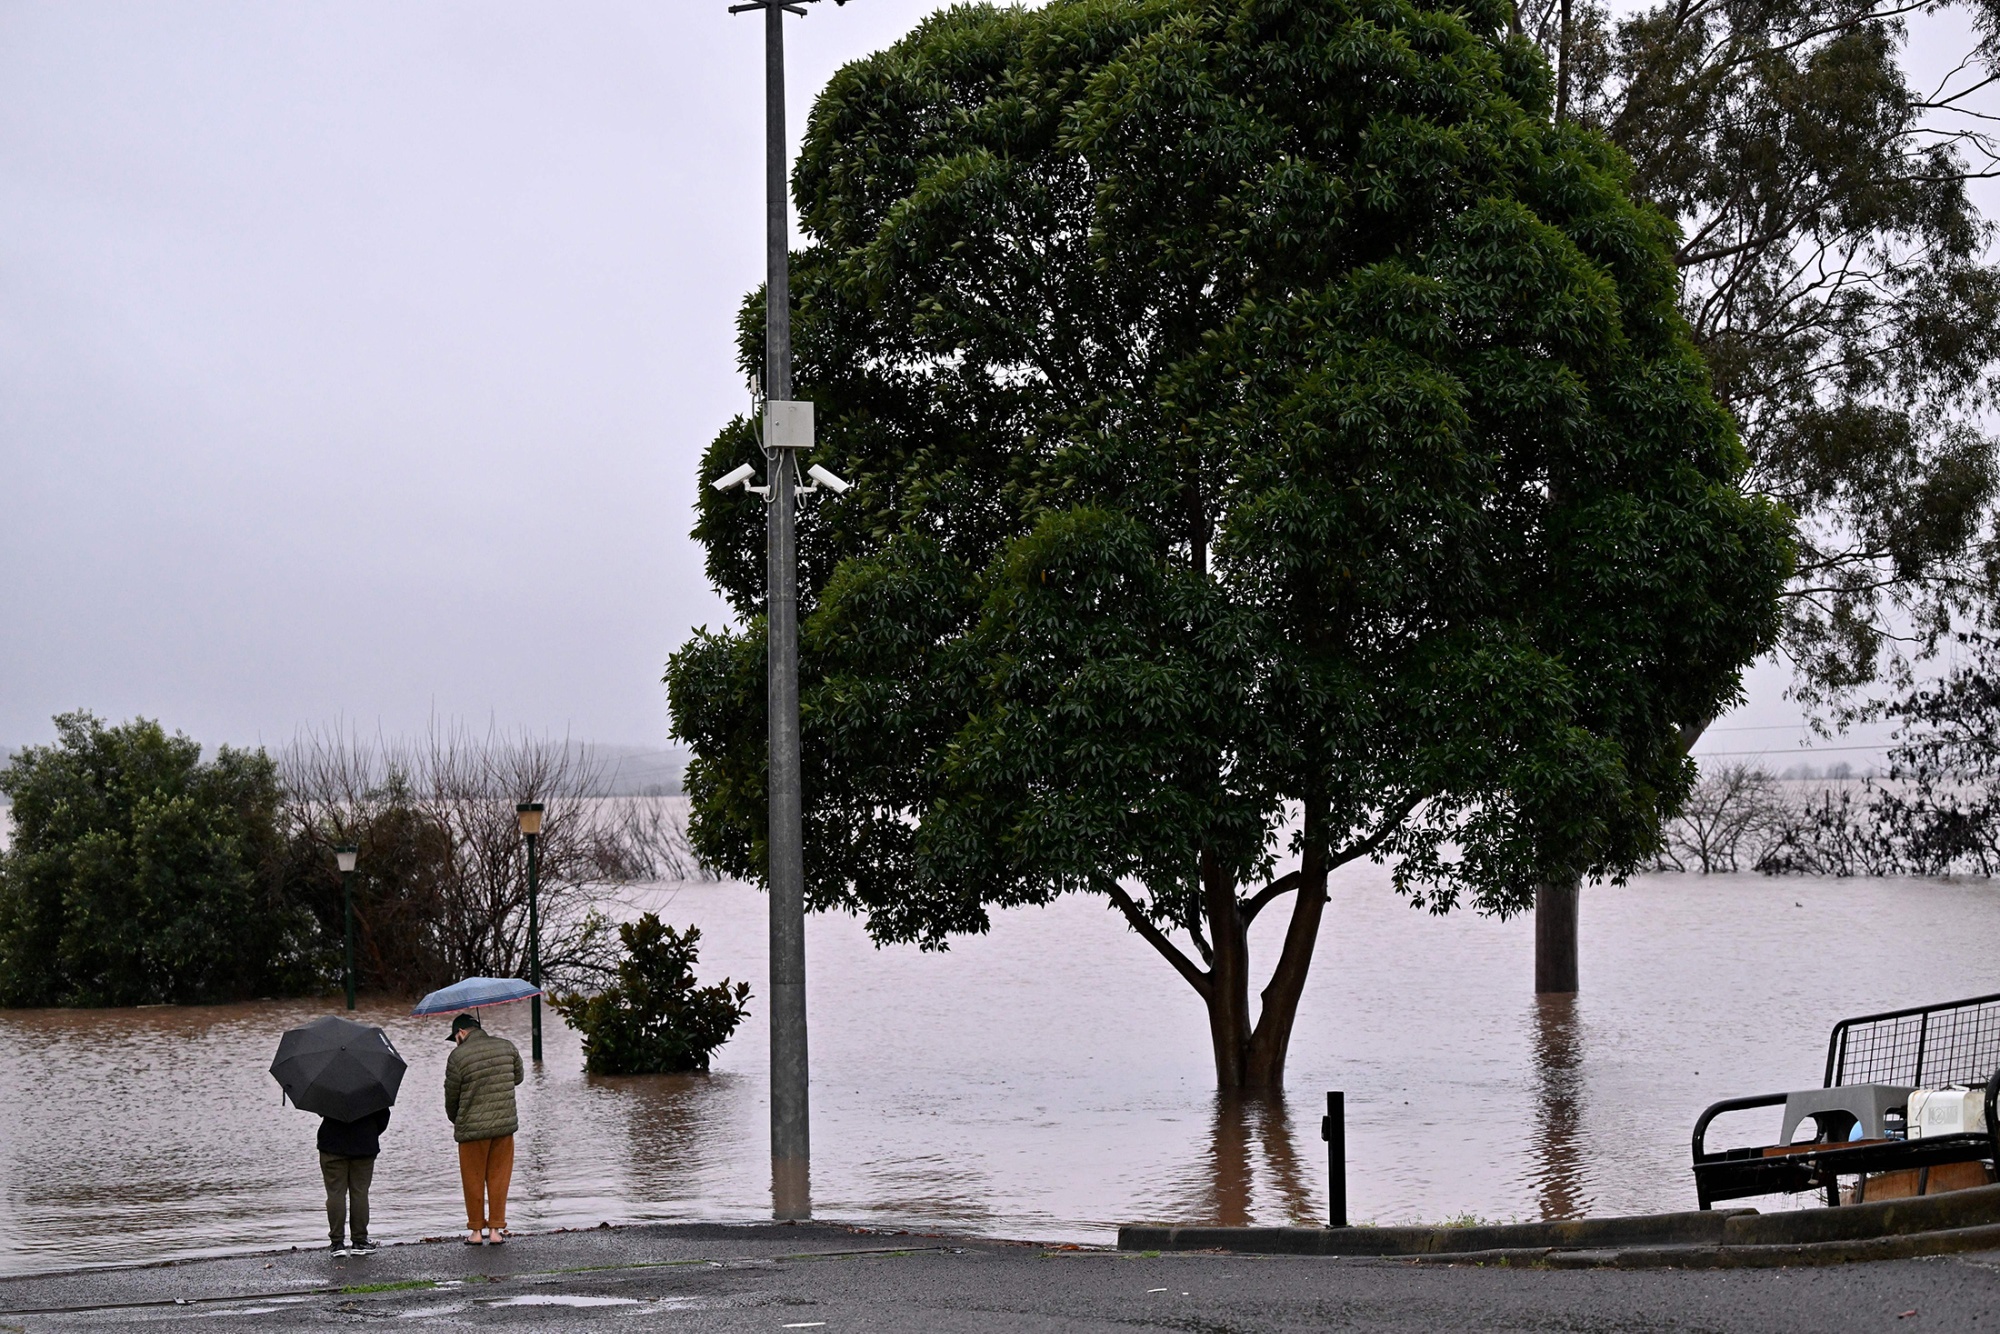 Rising floodwaters near a residential area in the Windsor suburb of Sydney on July 4.